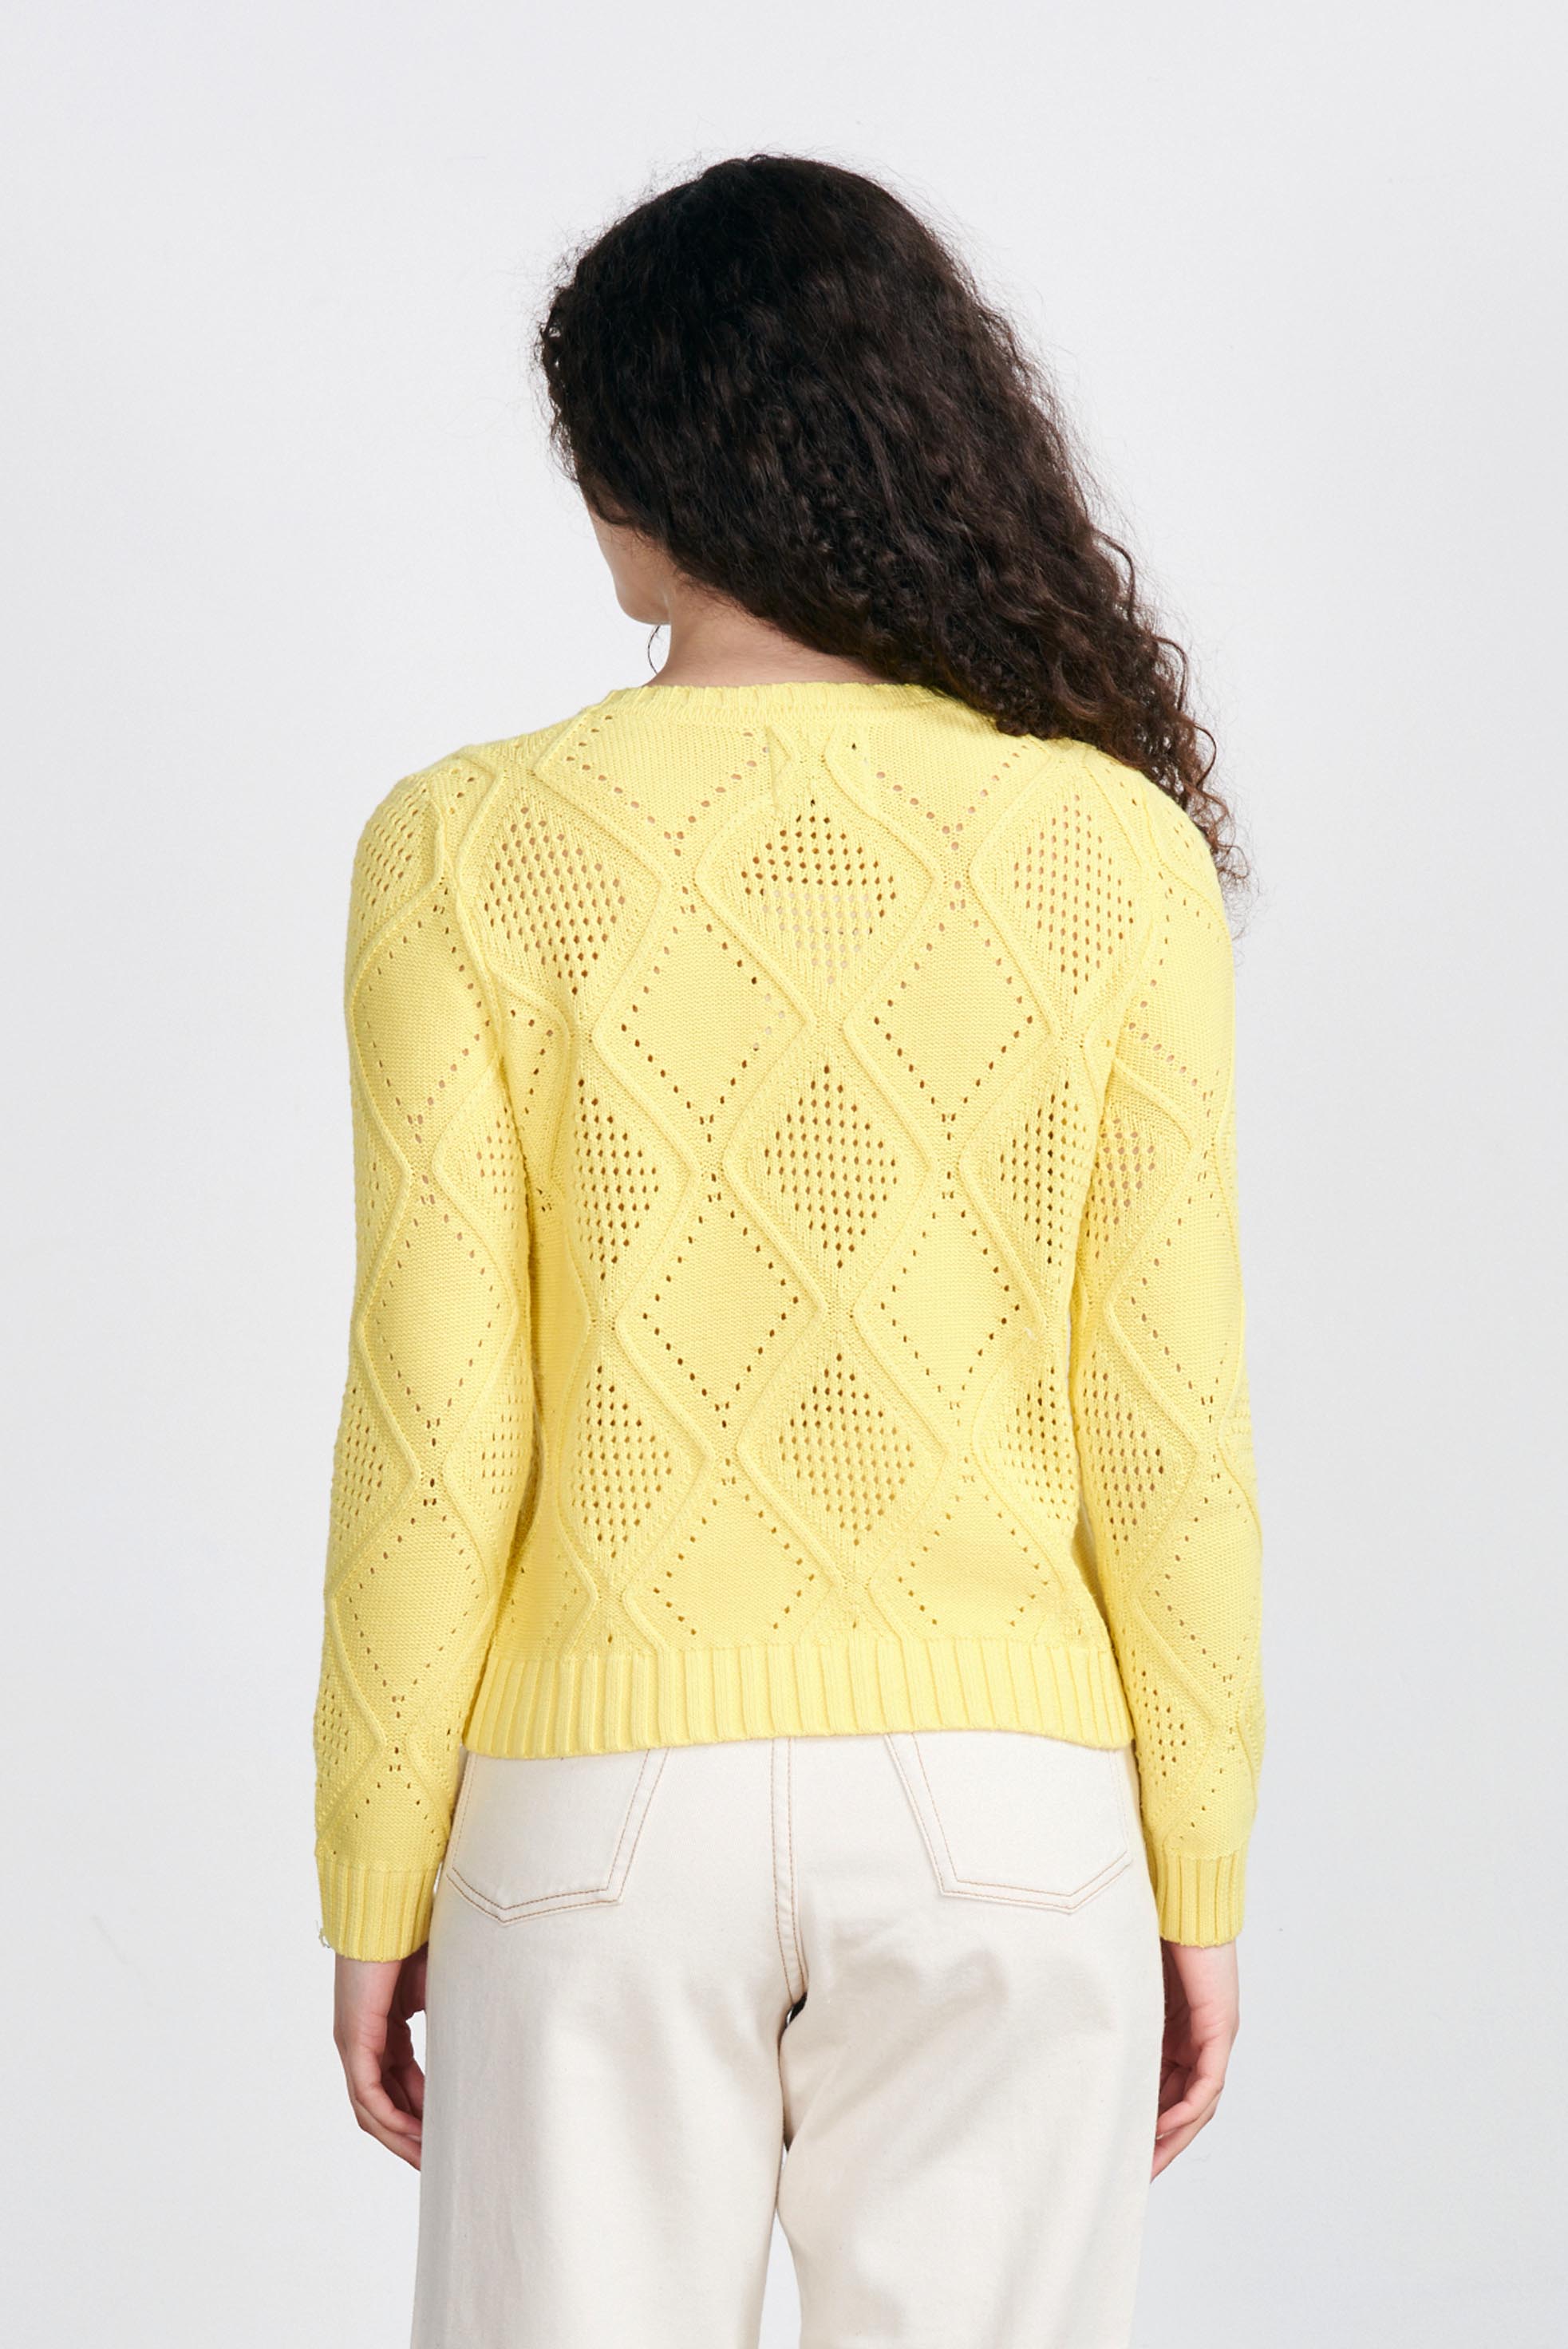 Brown haired female model wearing Jumper1234 Yellow cotton crew neck jumper with a diamond texture stitch pattern facing away from the camera